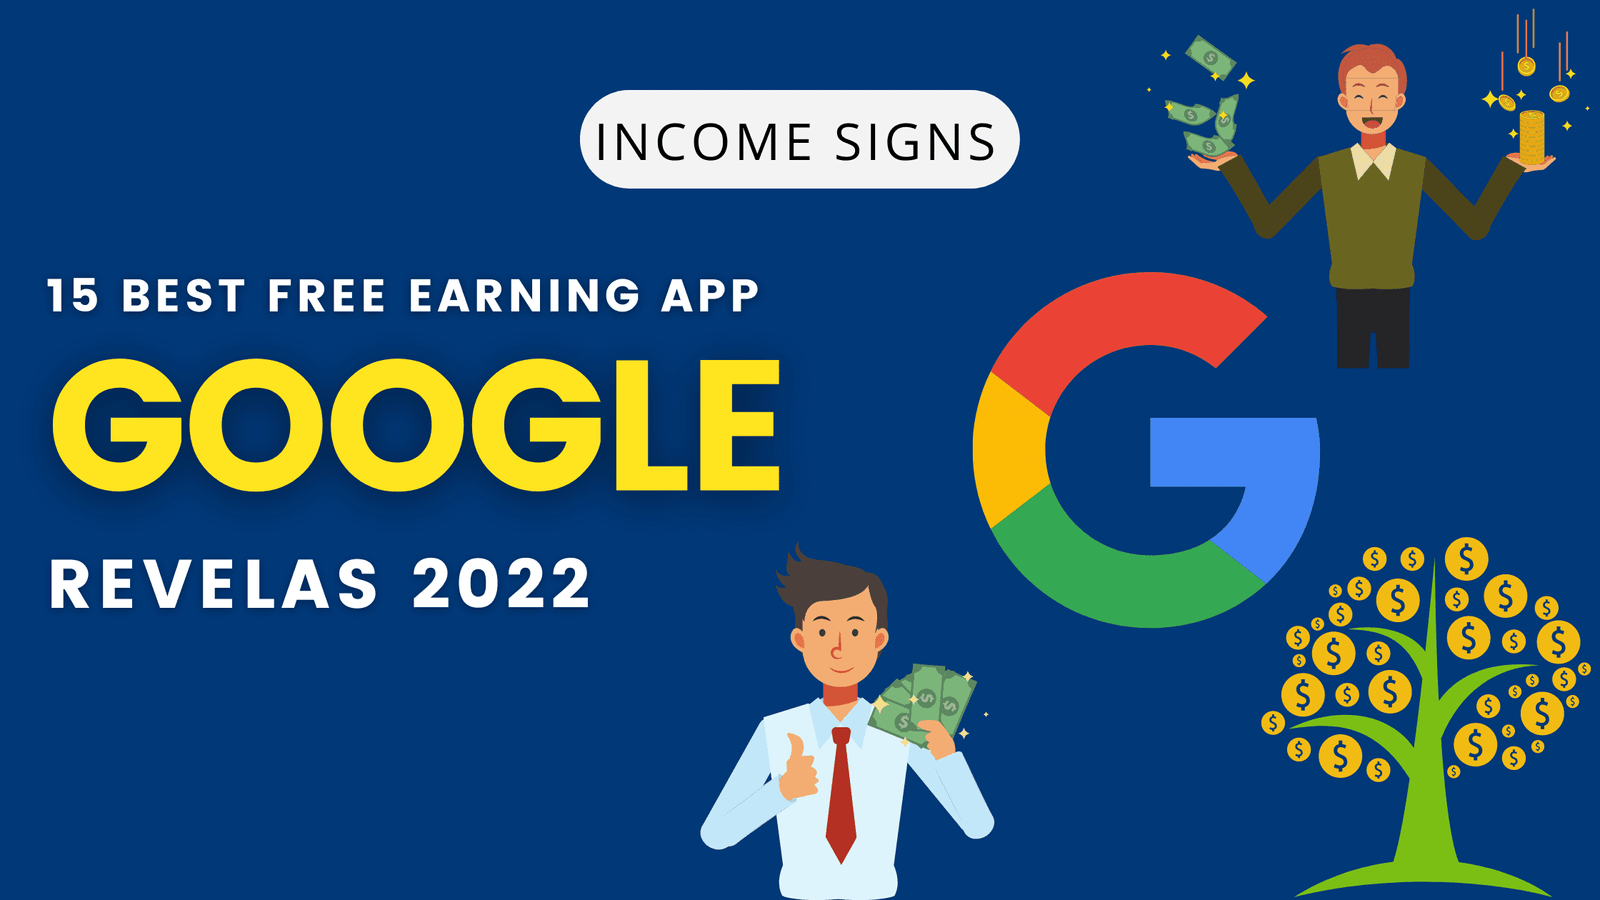 15 Best Free Earning Apps by Google (2022) - Income Signs.